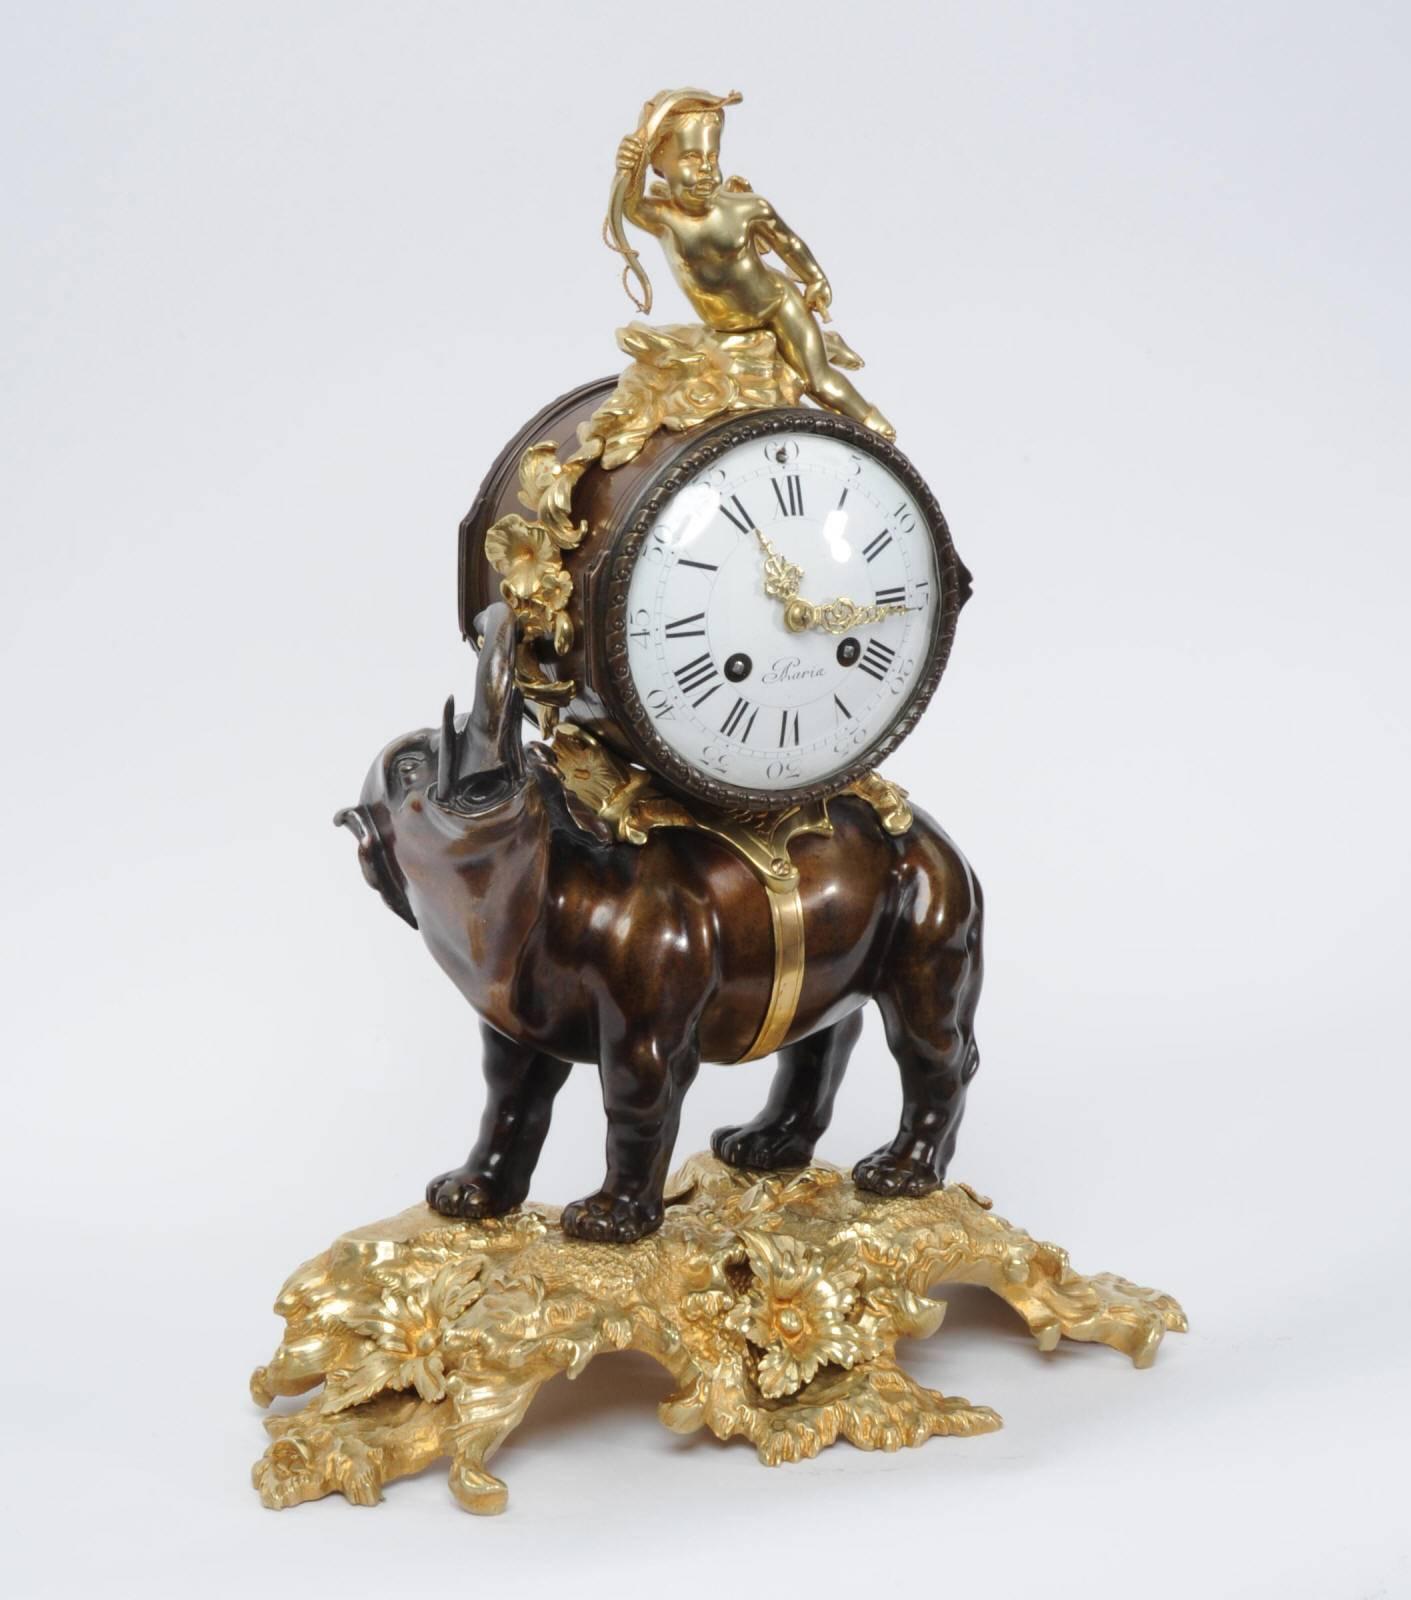 A fabulous and rare original antique French clock, featuring an elephant carrying the clock with cupid seated on top. It is beautifully made in bronze and ormolu (finely gilded bronze). The elephant stands proudly on a naturalistically modelled base